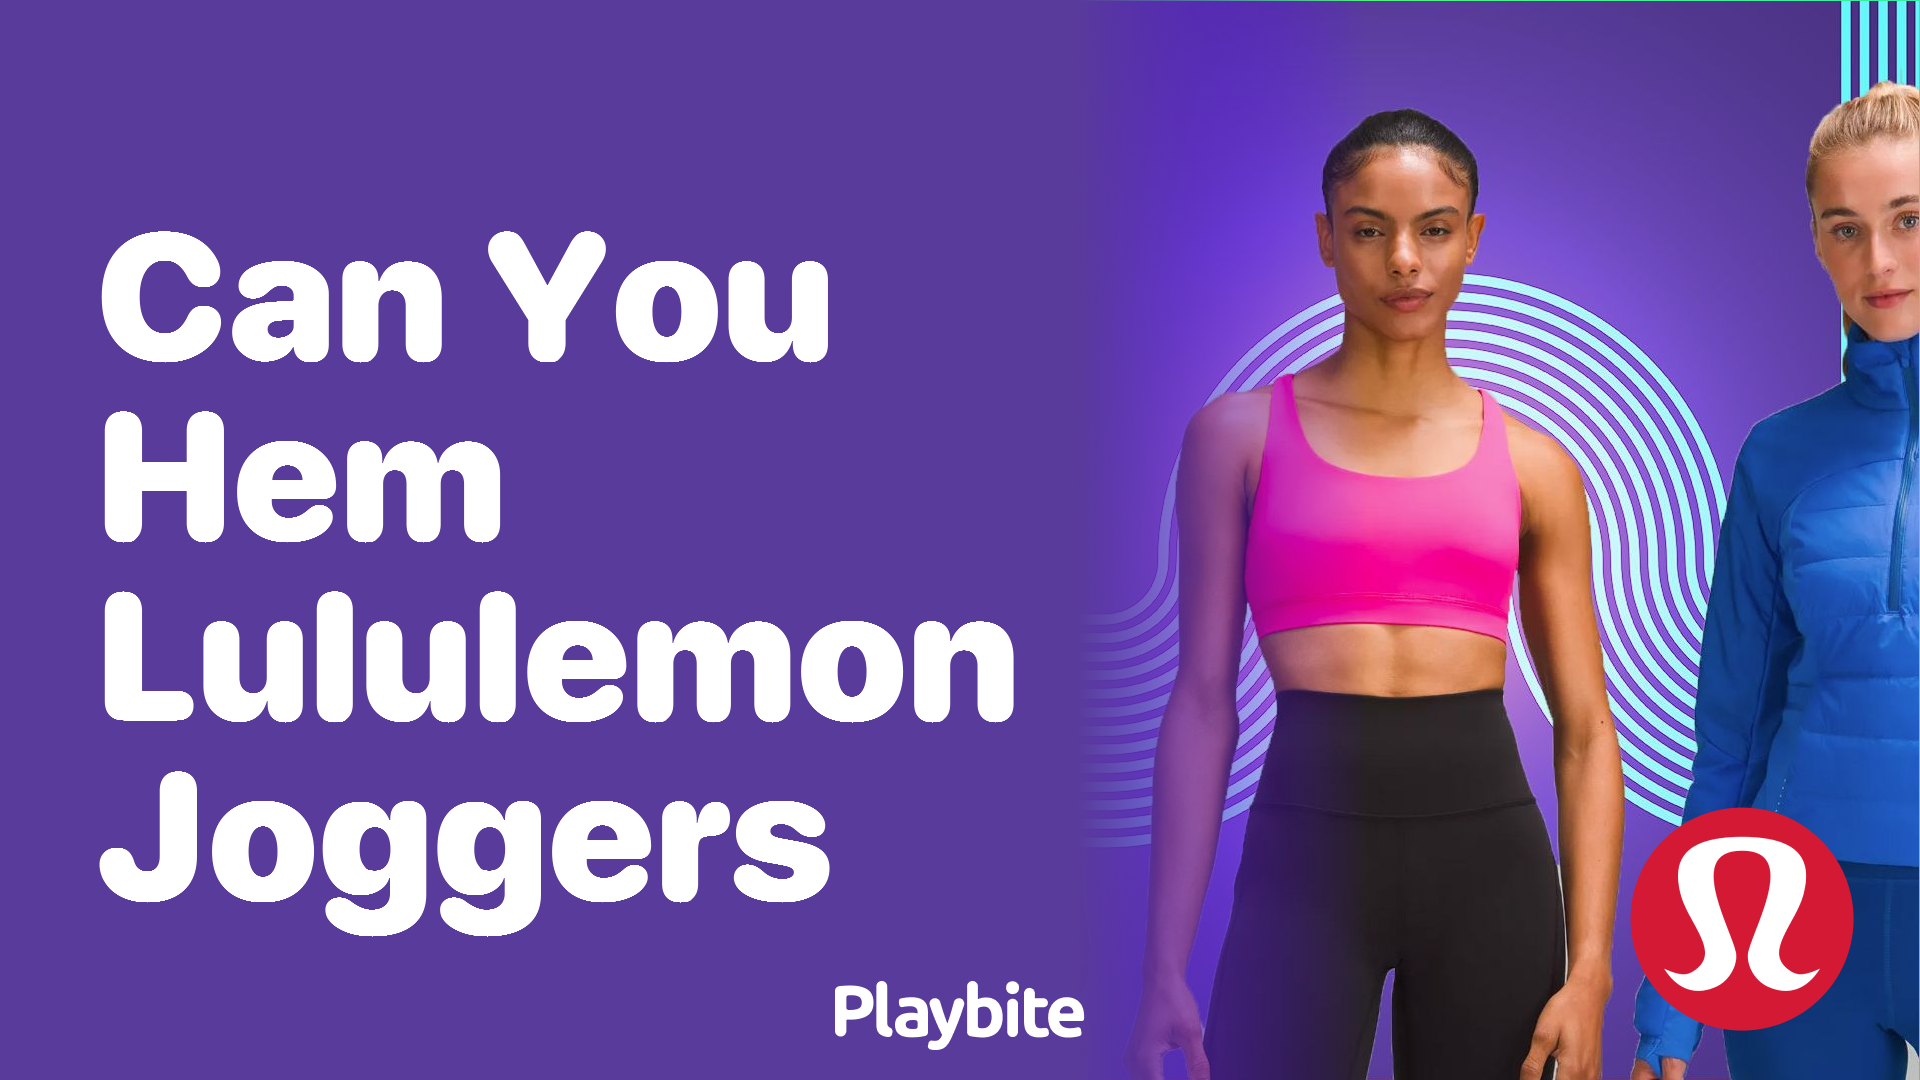 lululemon leggings: Activewear, joggers and jackets are all on